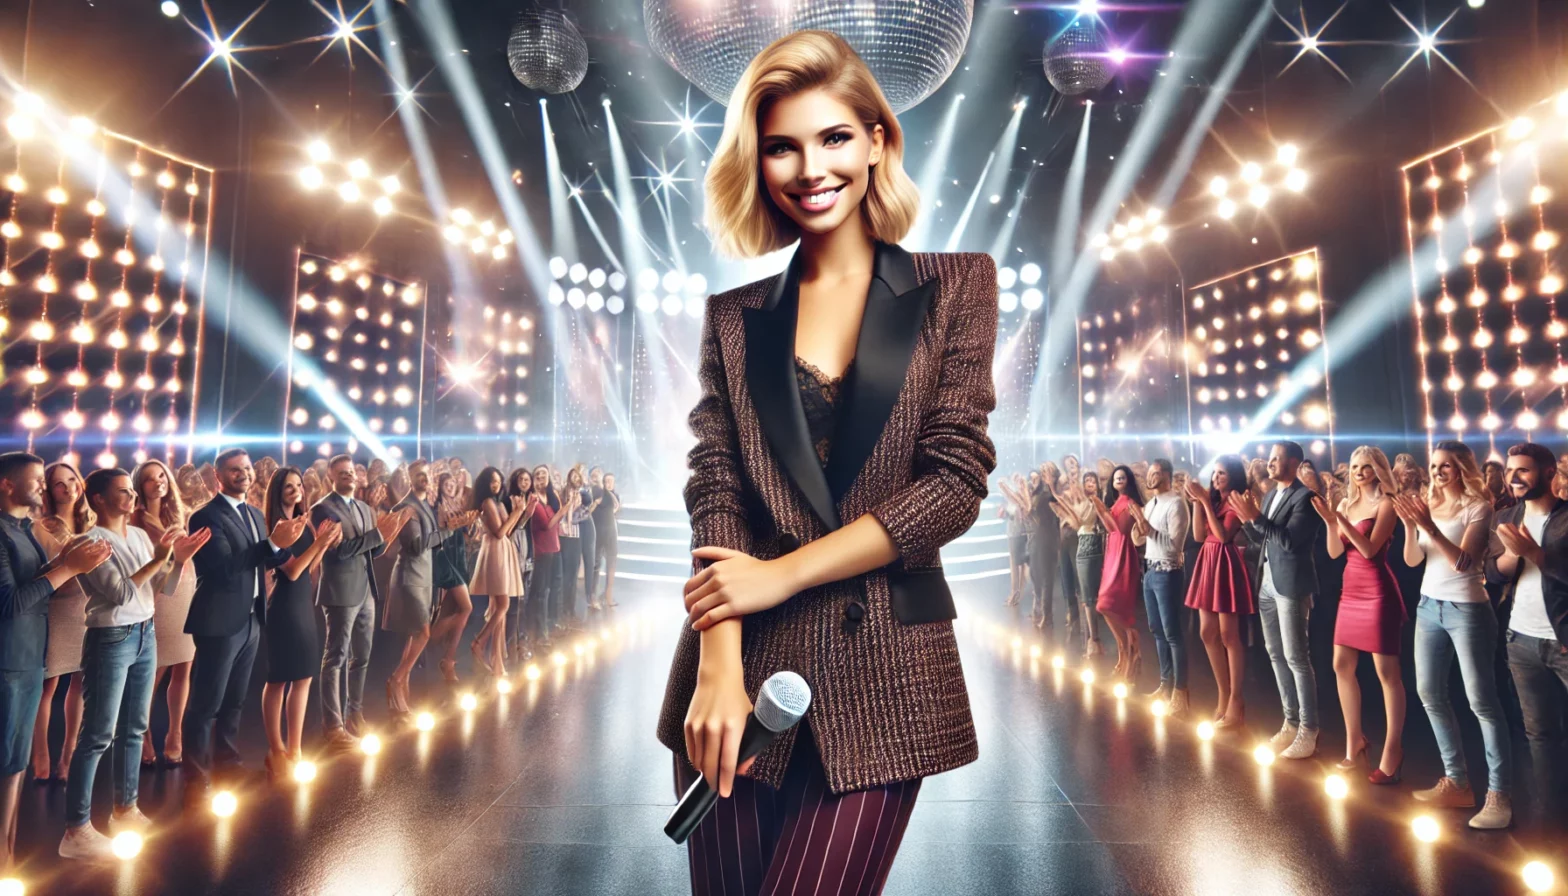 America's Next Top Reality TV Host standing confidently on a vibrant, glitzy stage with bright lights and a cheering audience. The host is stylishly dressed in a chic, modern outfit, holding a microphone and smiling warmly, exuding charisma and charm.